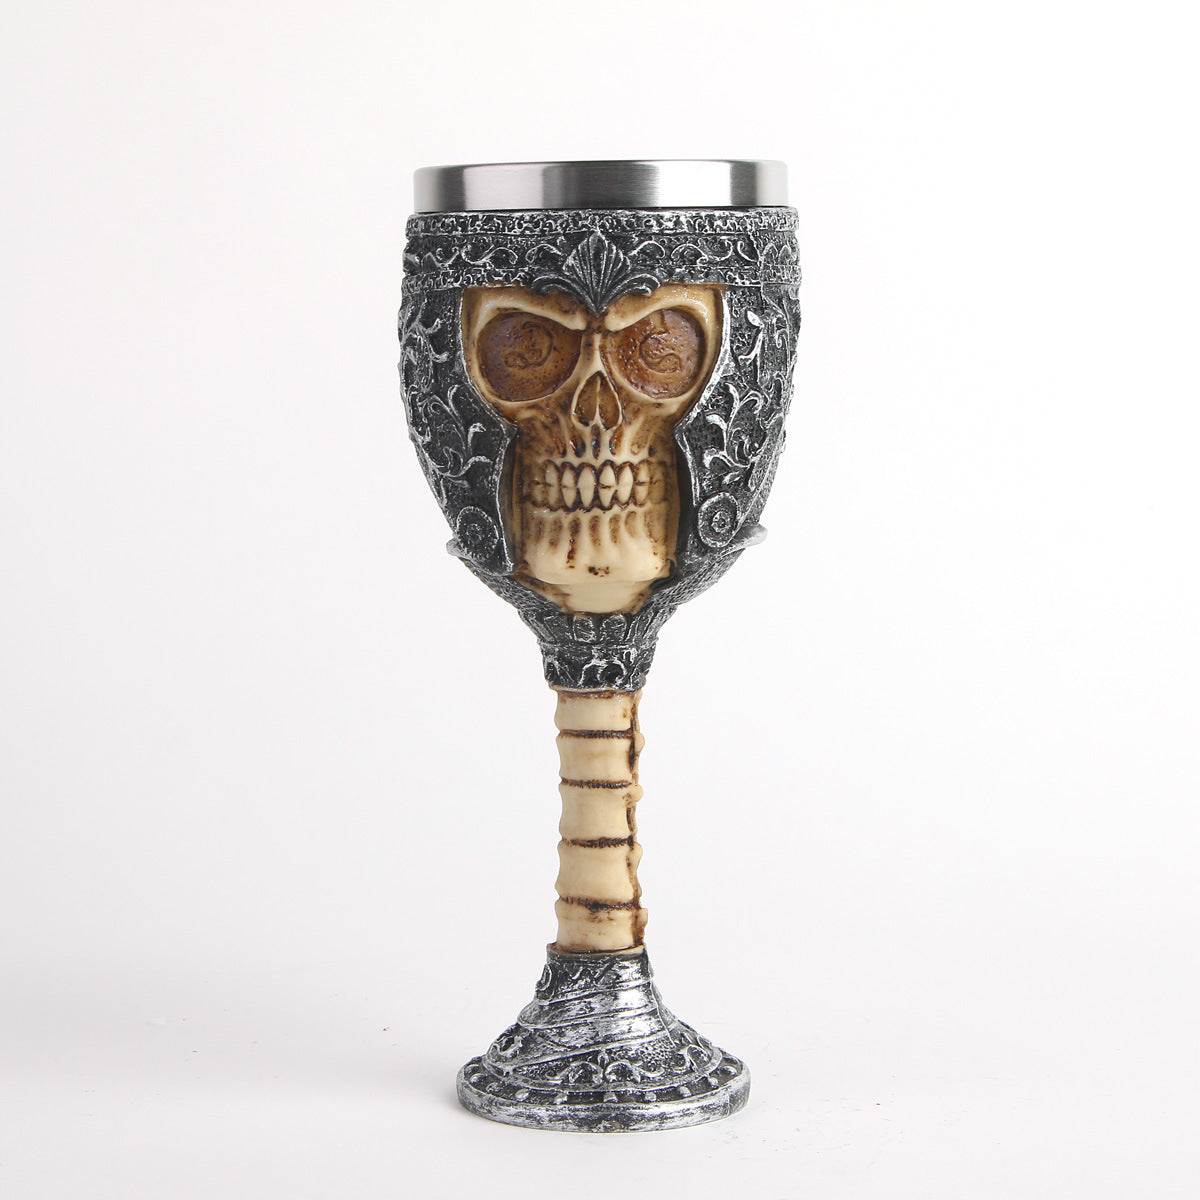 A Skull Glass with a skull on it.